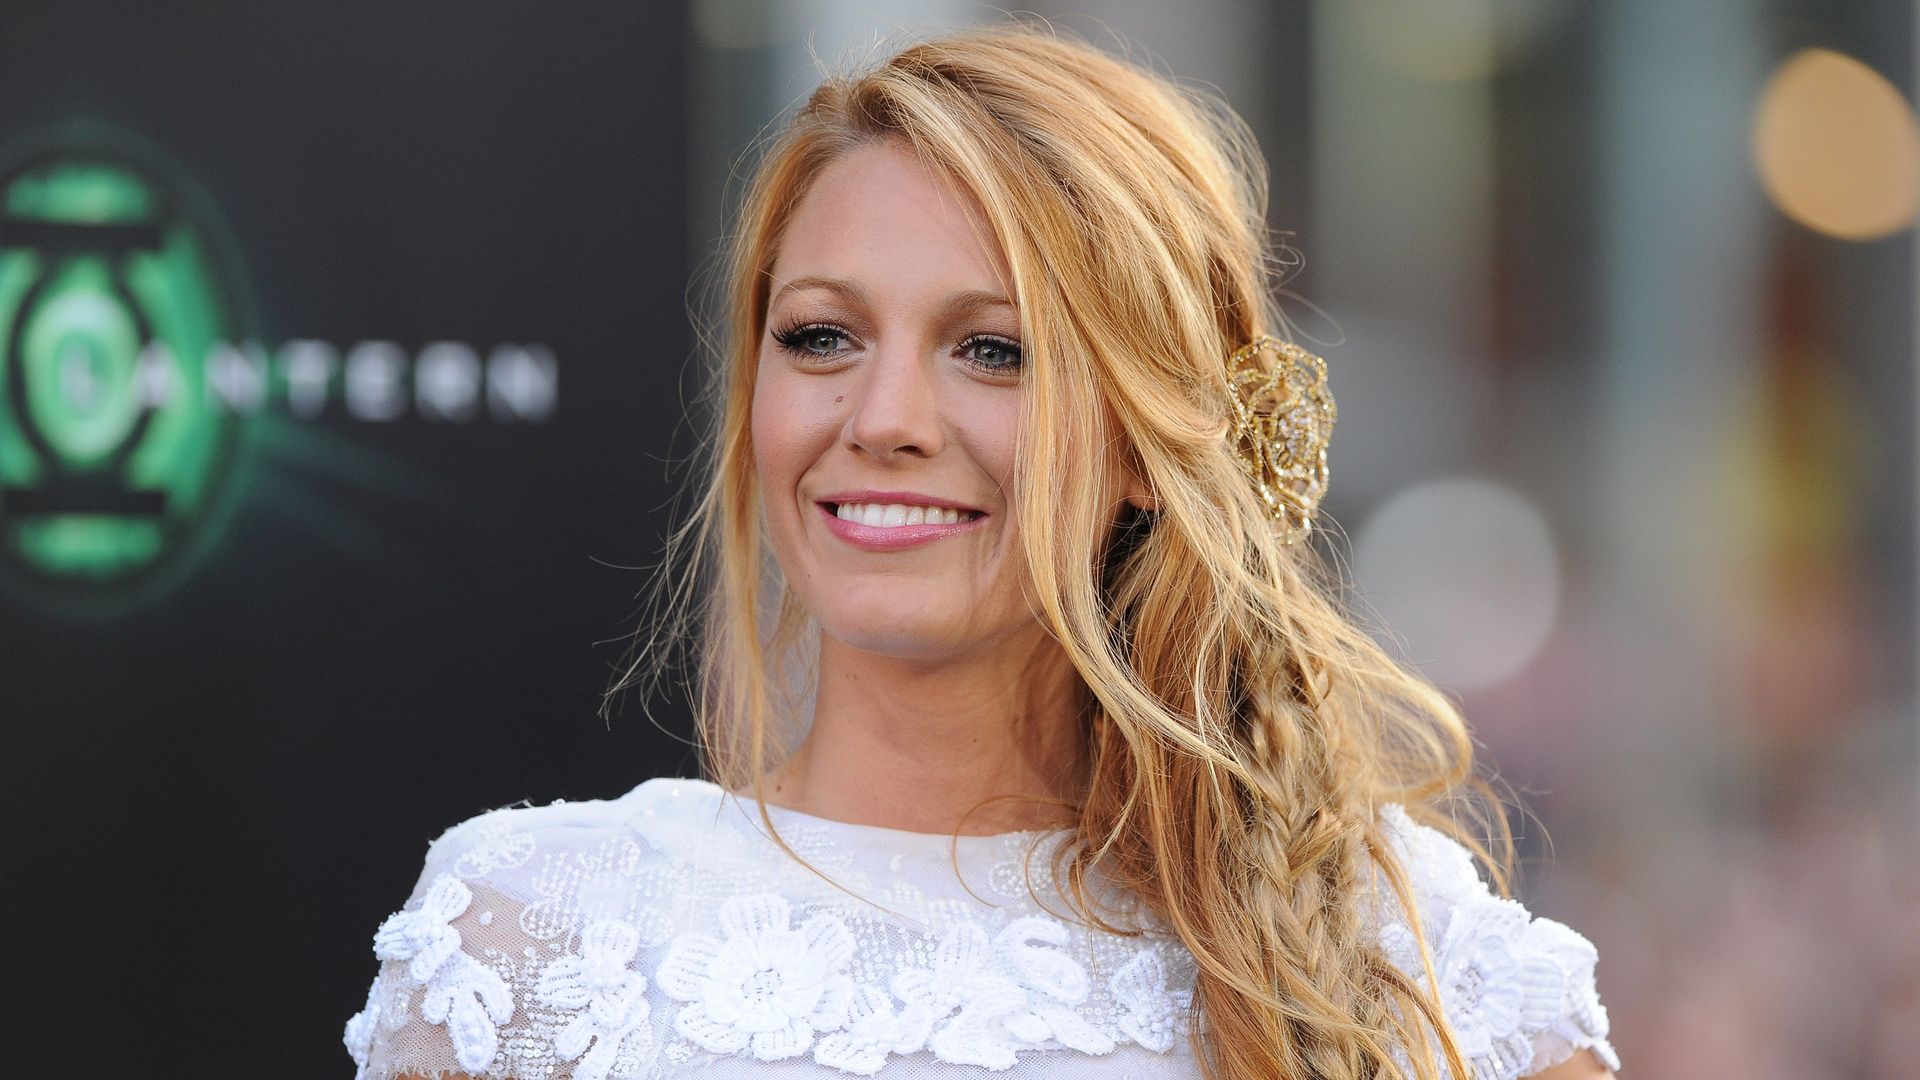 Blake Lively with fishtail hair and white dress